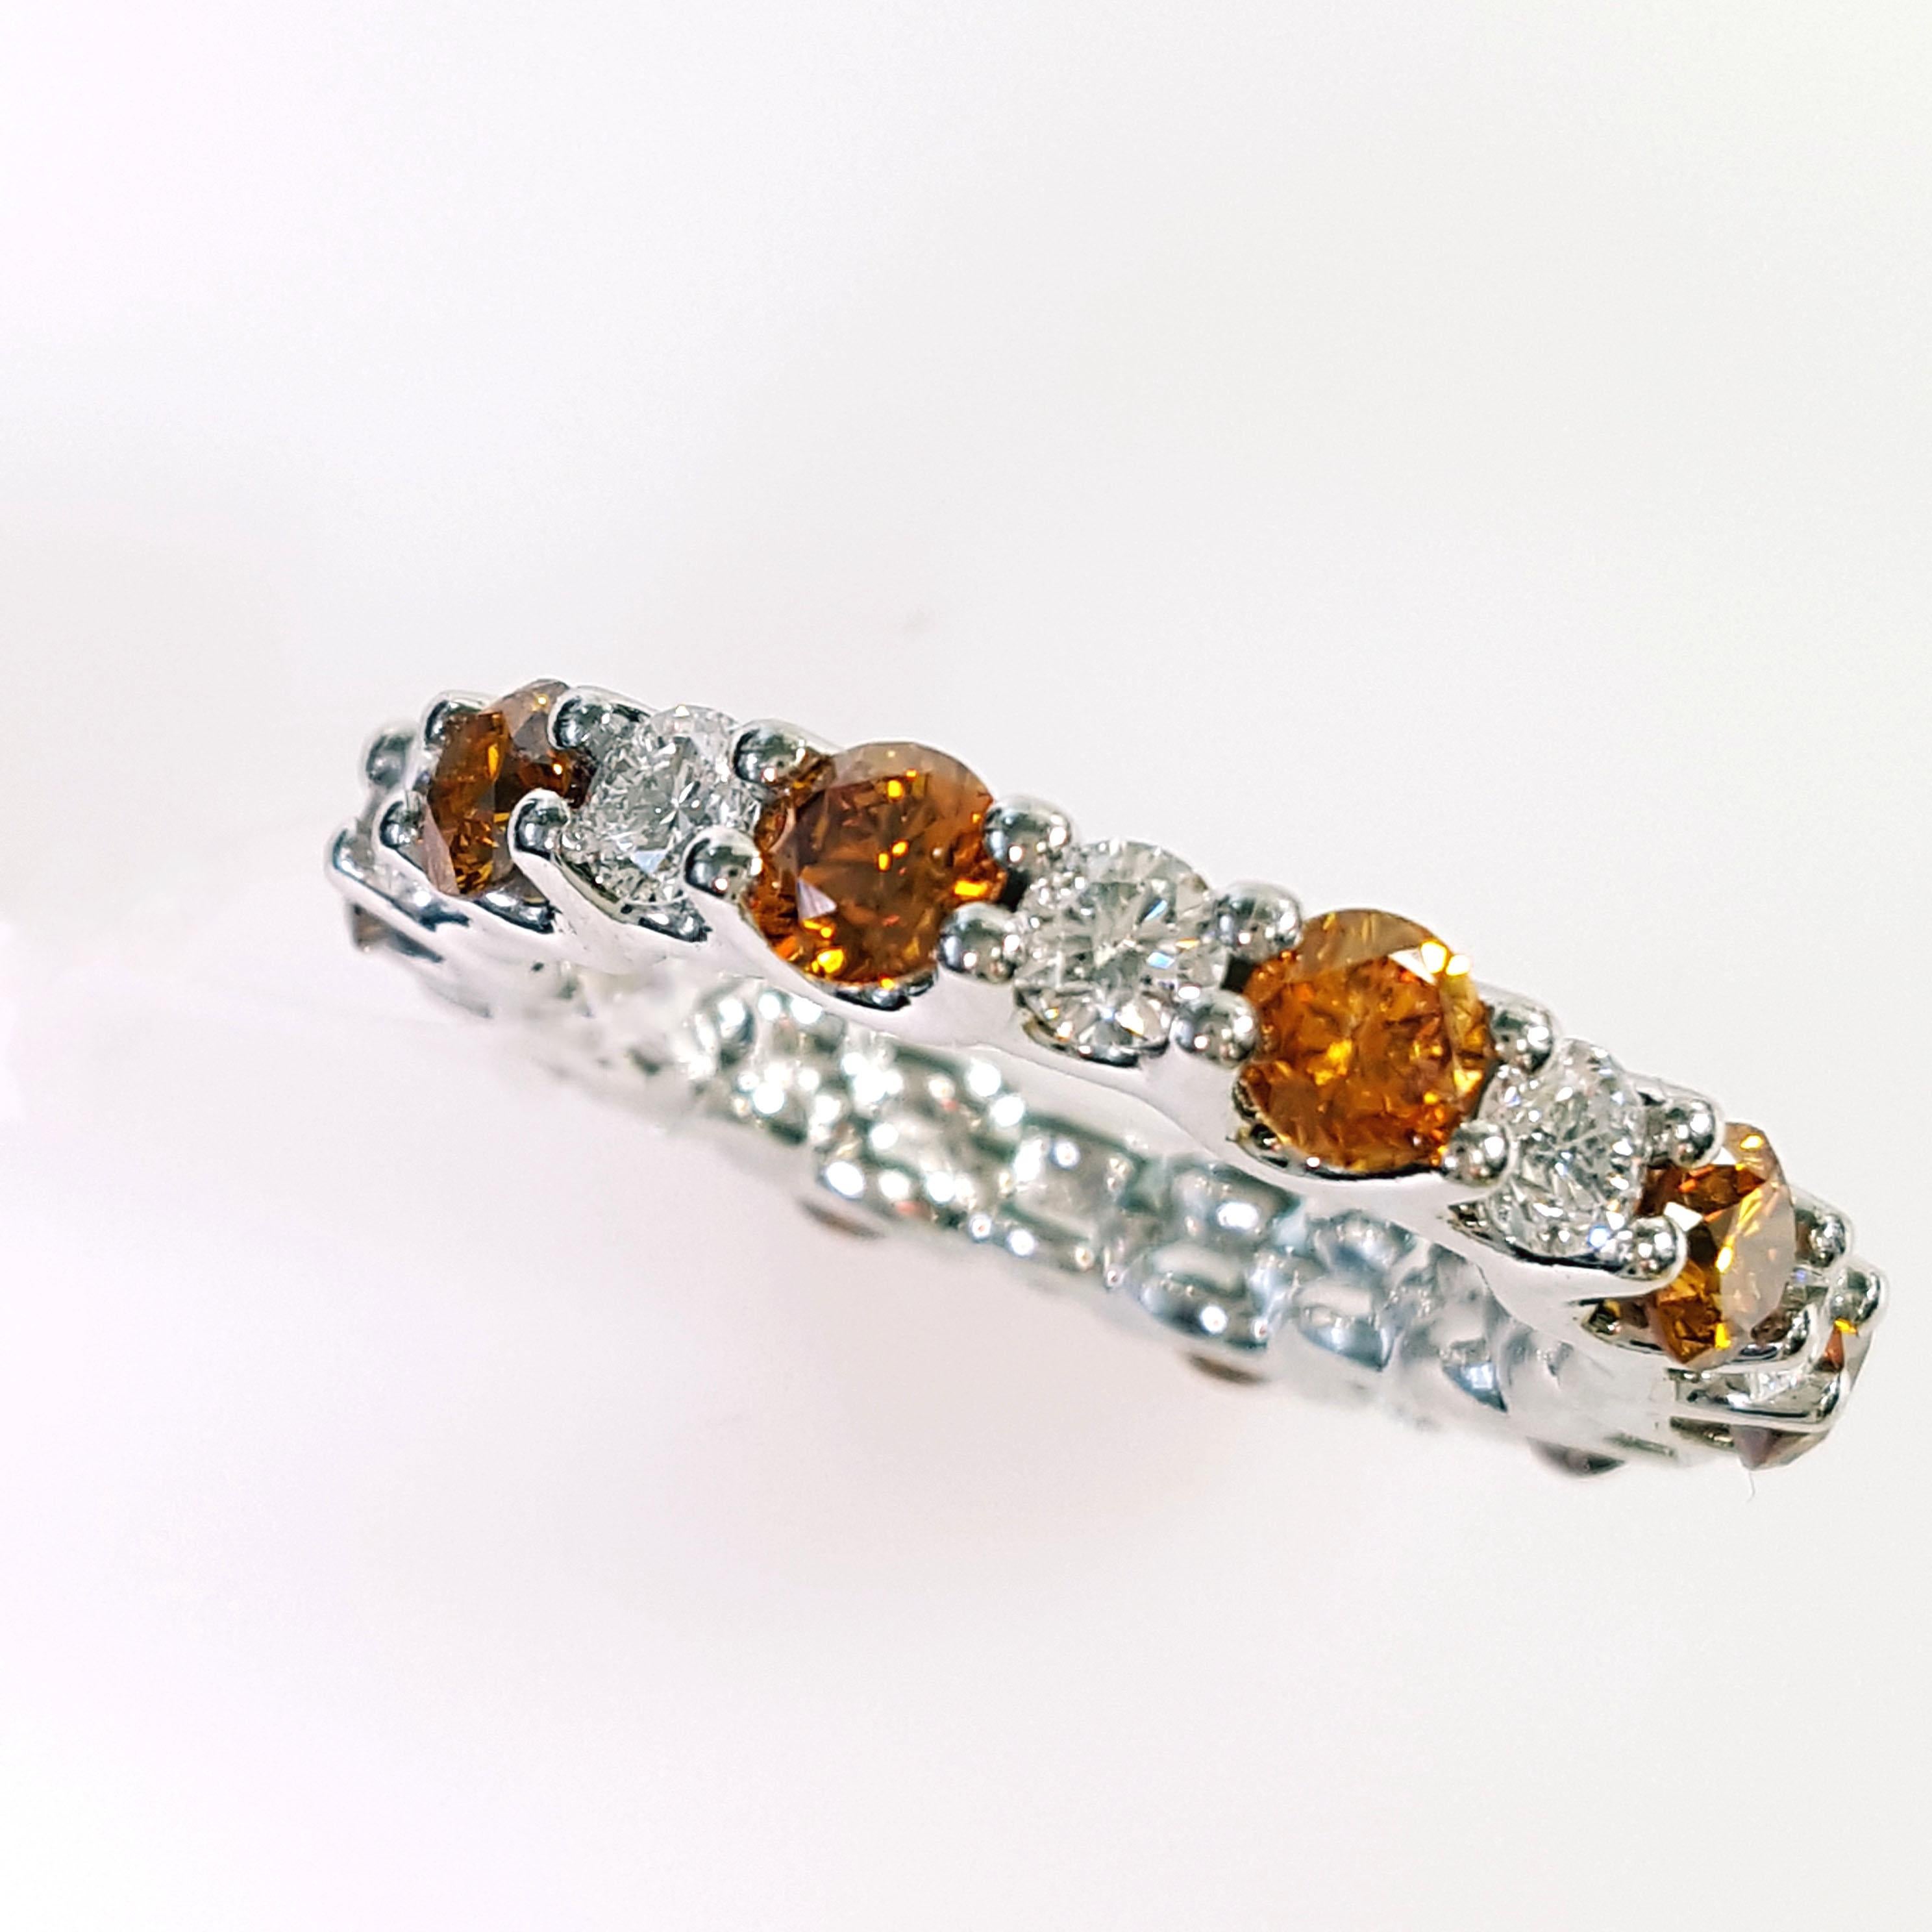 Contemporary 3.2 Carat Round Cut Orange and White Diamond Eternity Band Set in Platinum. For Sale